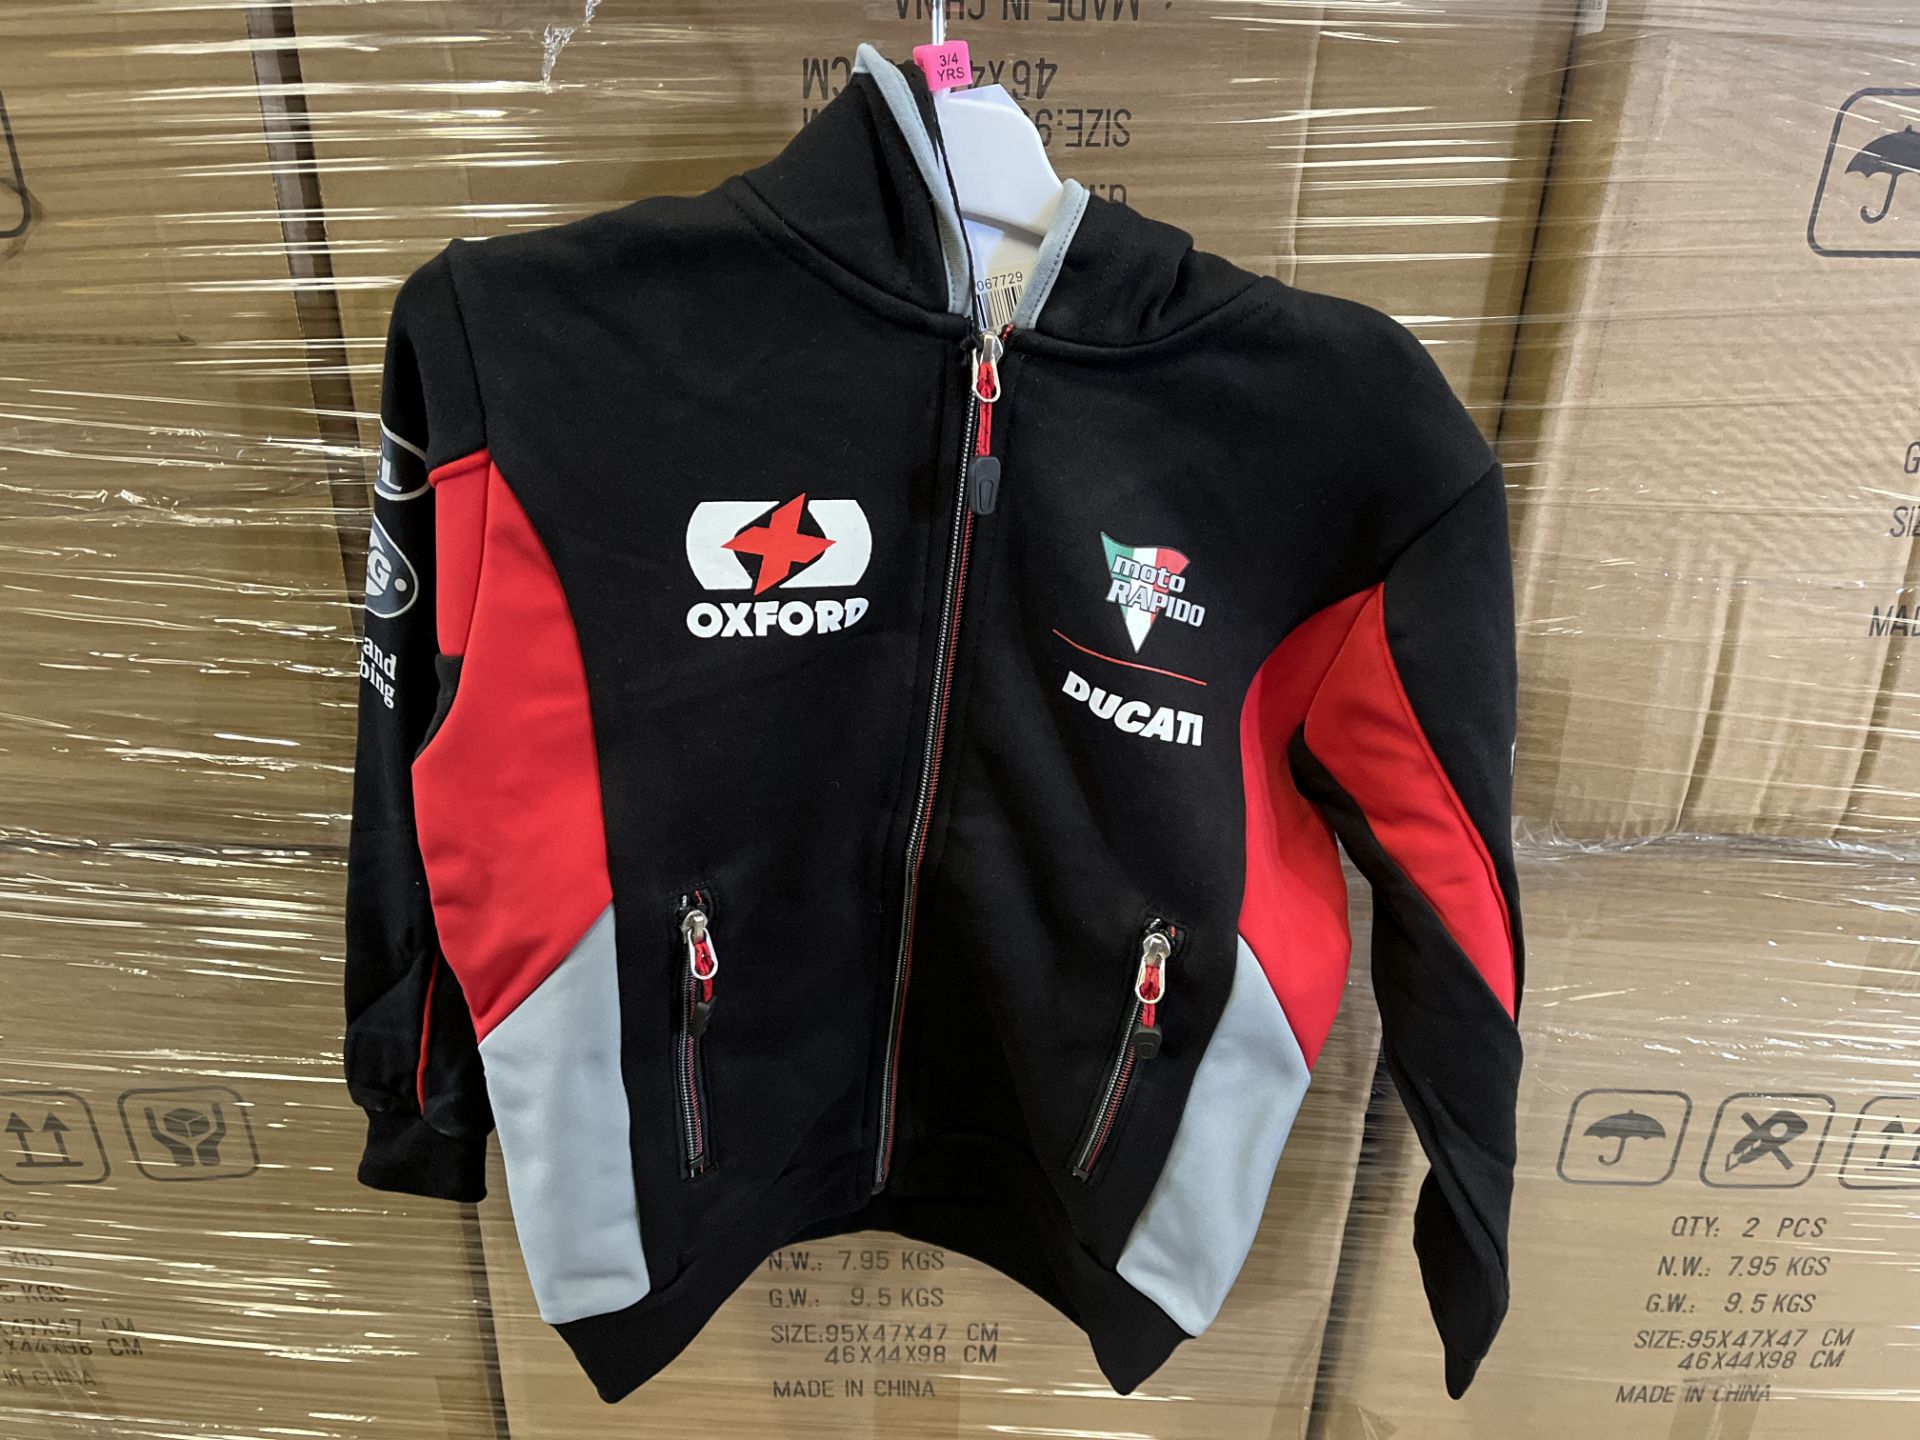 (NO VAT) 12 X BRAND NEW OFFICIAL CHILDRENS OXFORD DUCATI HOODIES IN VARIOUS SIZES S1RA